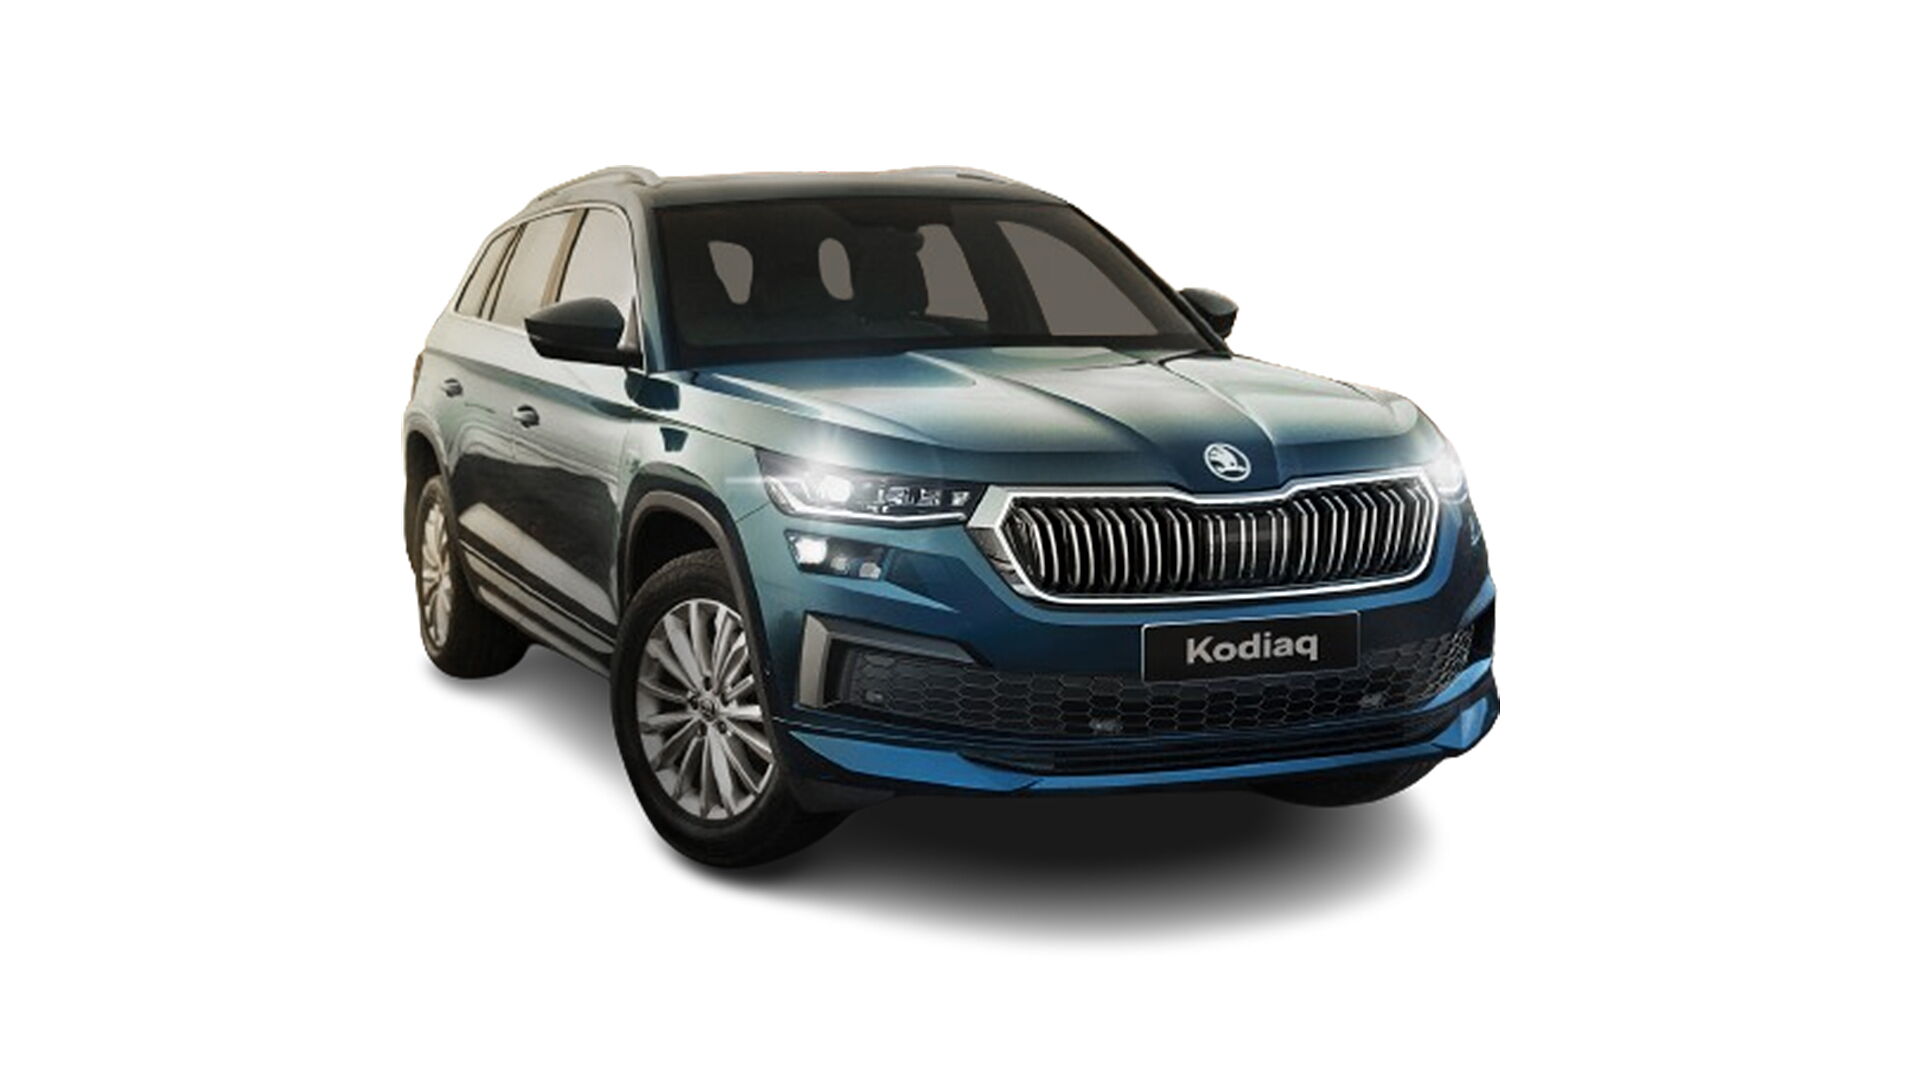 2023 Skoda Kodiaq bookings open, prices start from Rs 37.49 lakh - Overdrive